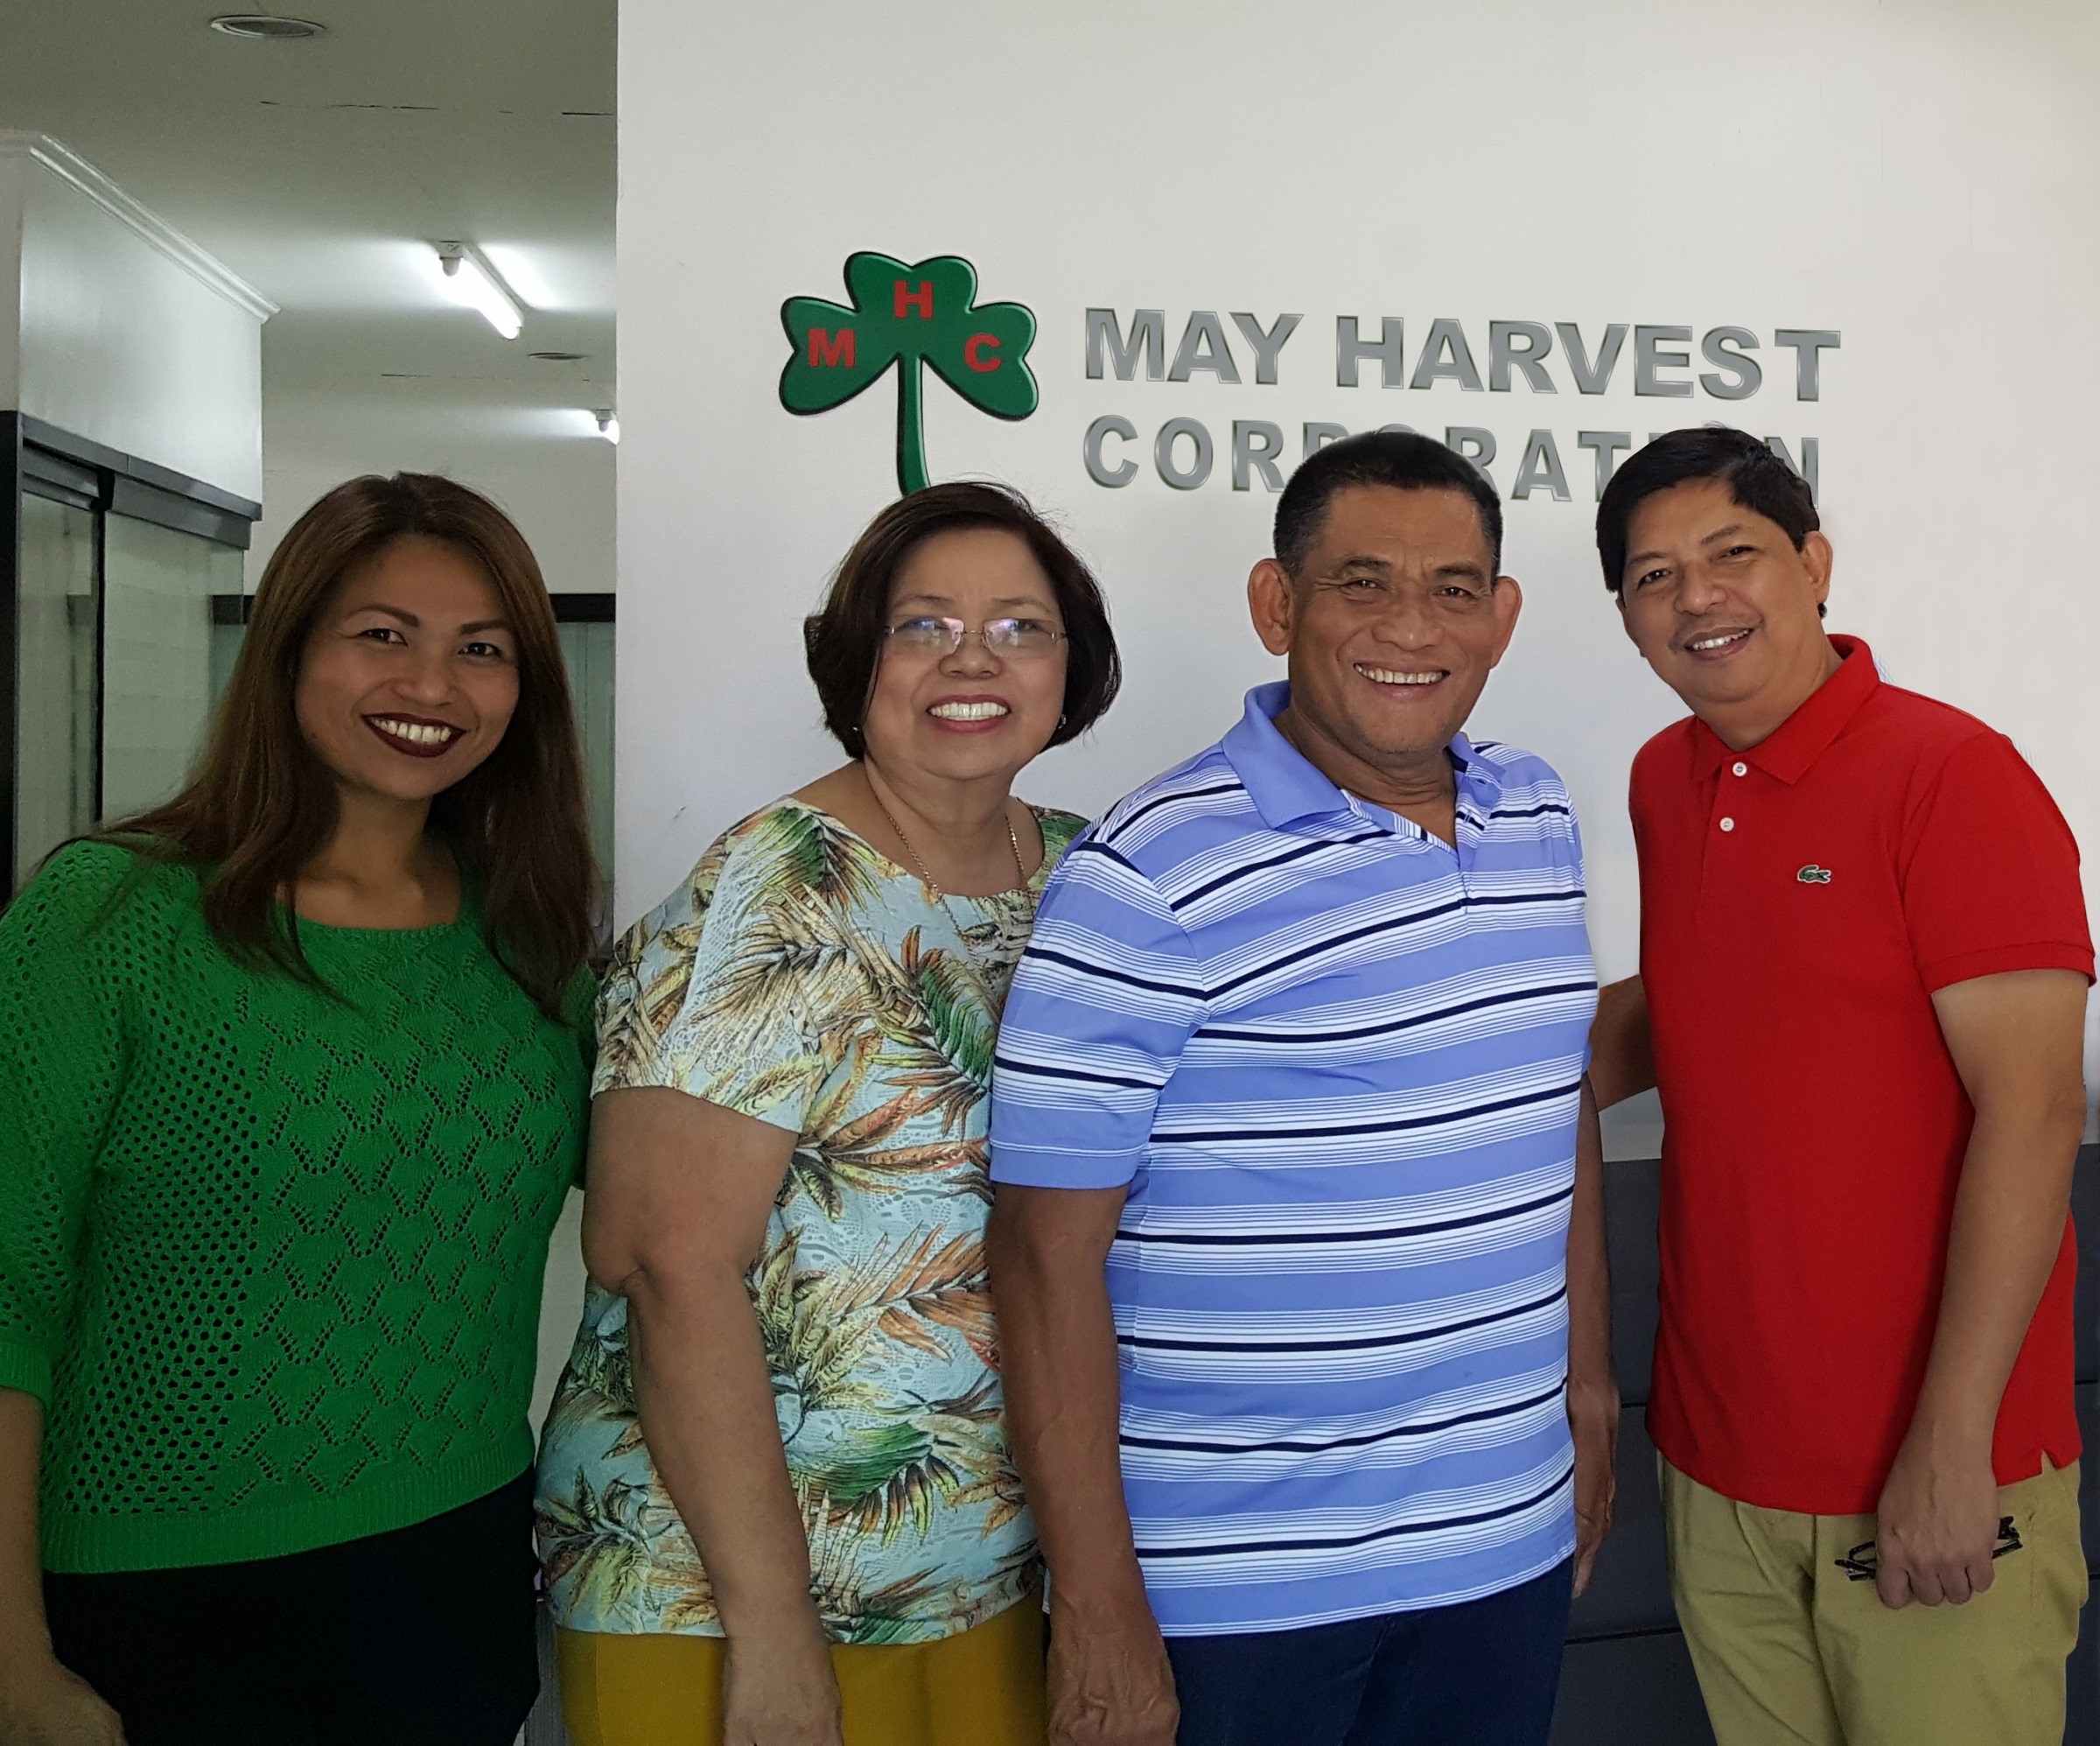 May Harvest aims to be best in class